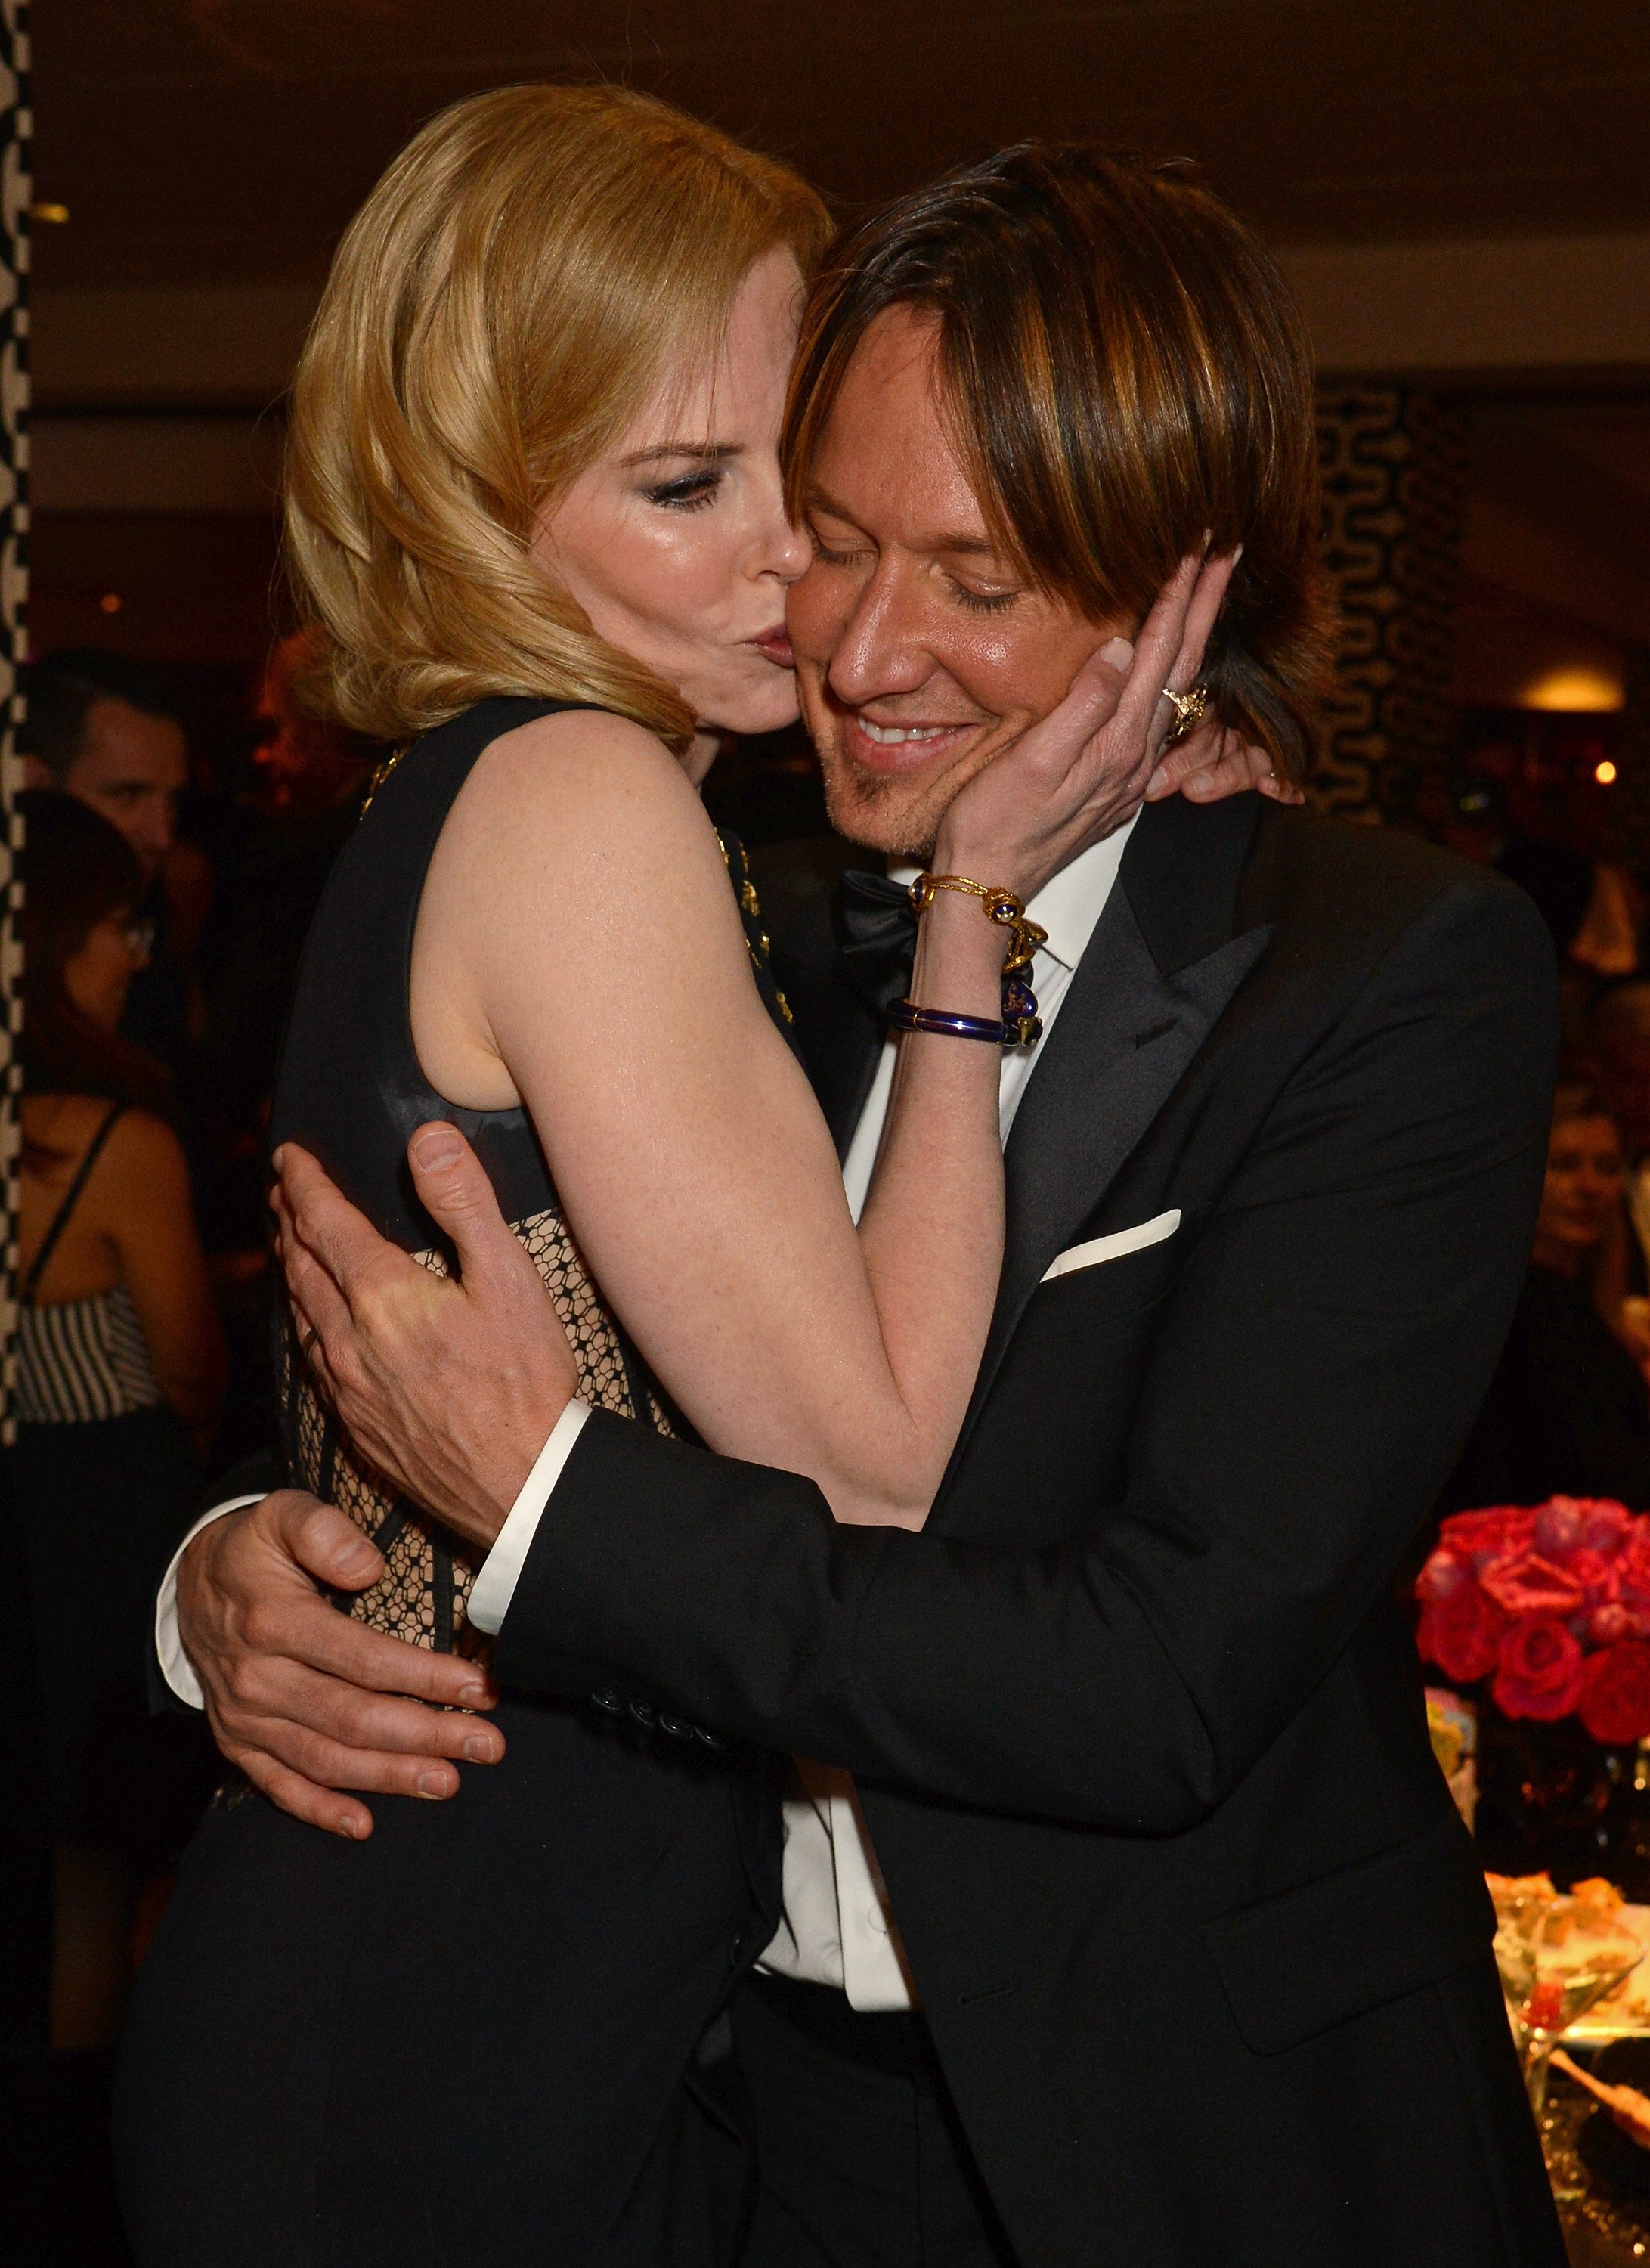 Actress Nicole Kidman and musician Keith Urban at HBO's Official Golden Globe Awards After Party on January 13, 2013 in Beverly Hills, California. | Source: Getty Images 